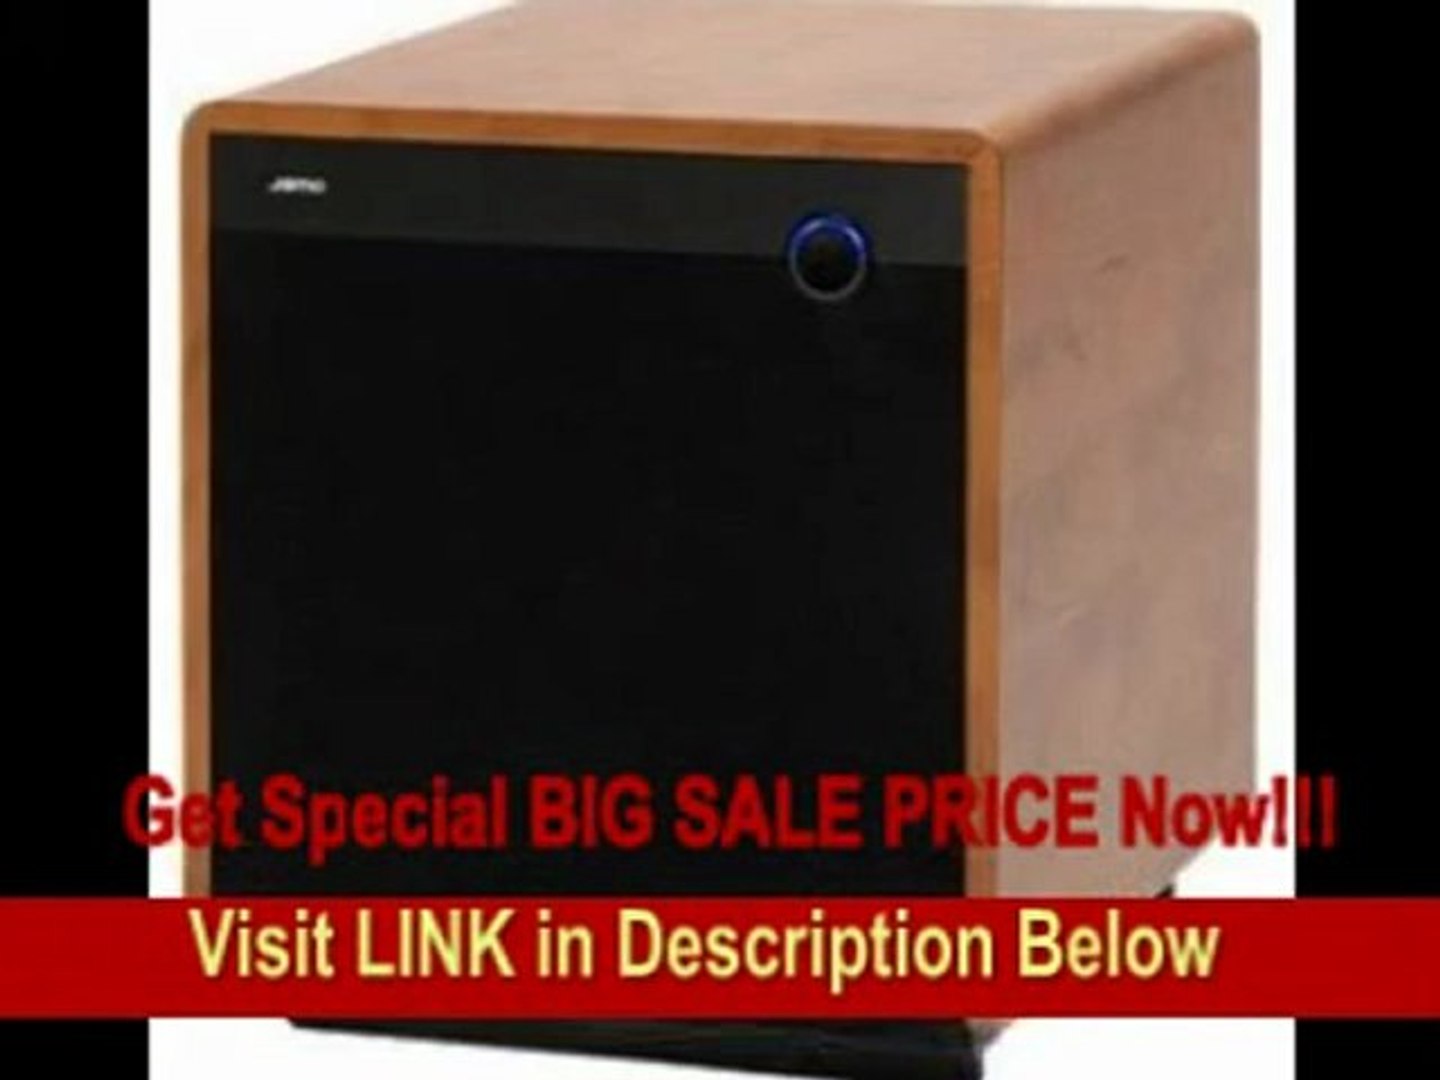 BEST BUY] Jamo SUB 650 12 650W powered subwoofer - video Dailymotion